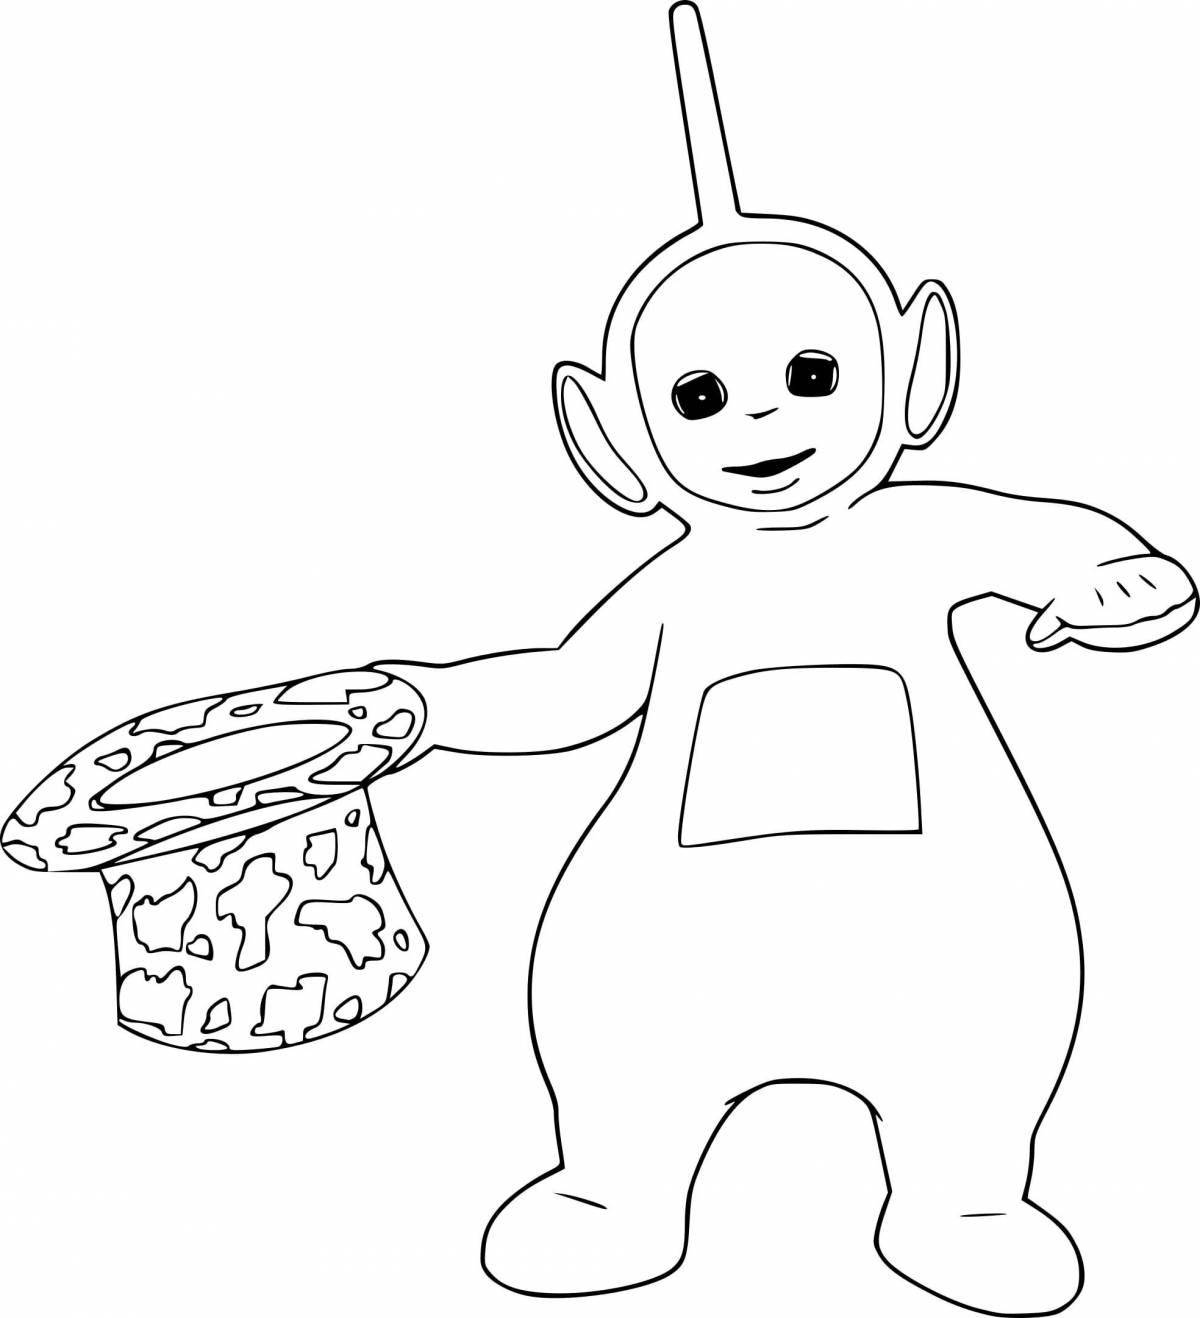 Slender-tubbies awesome coloring pages